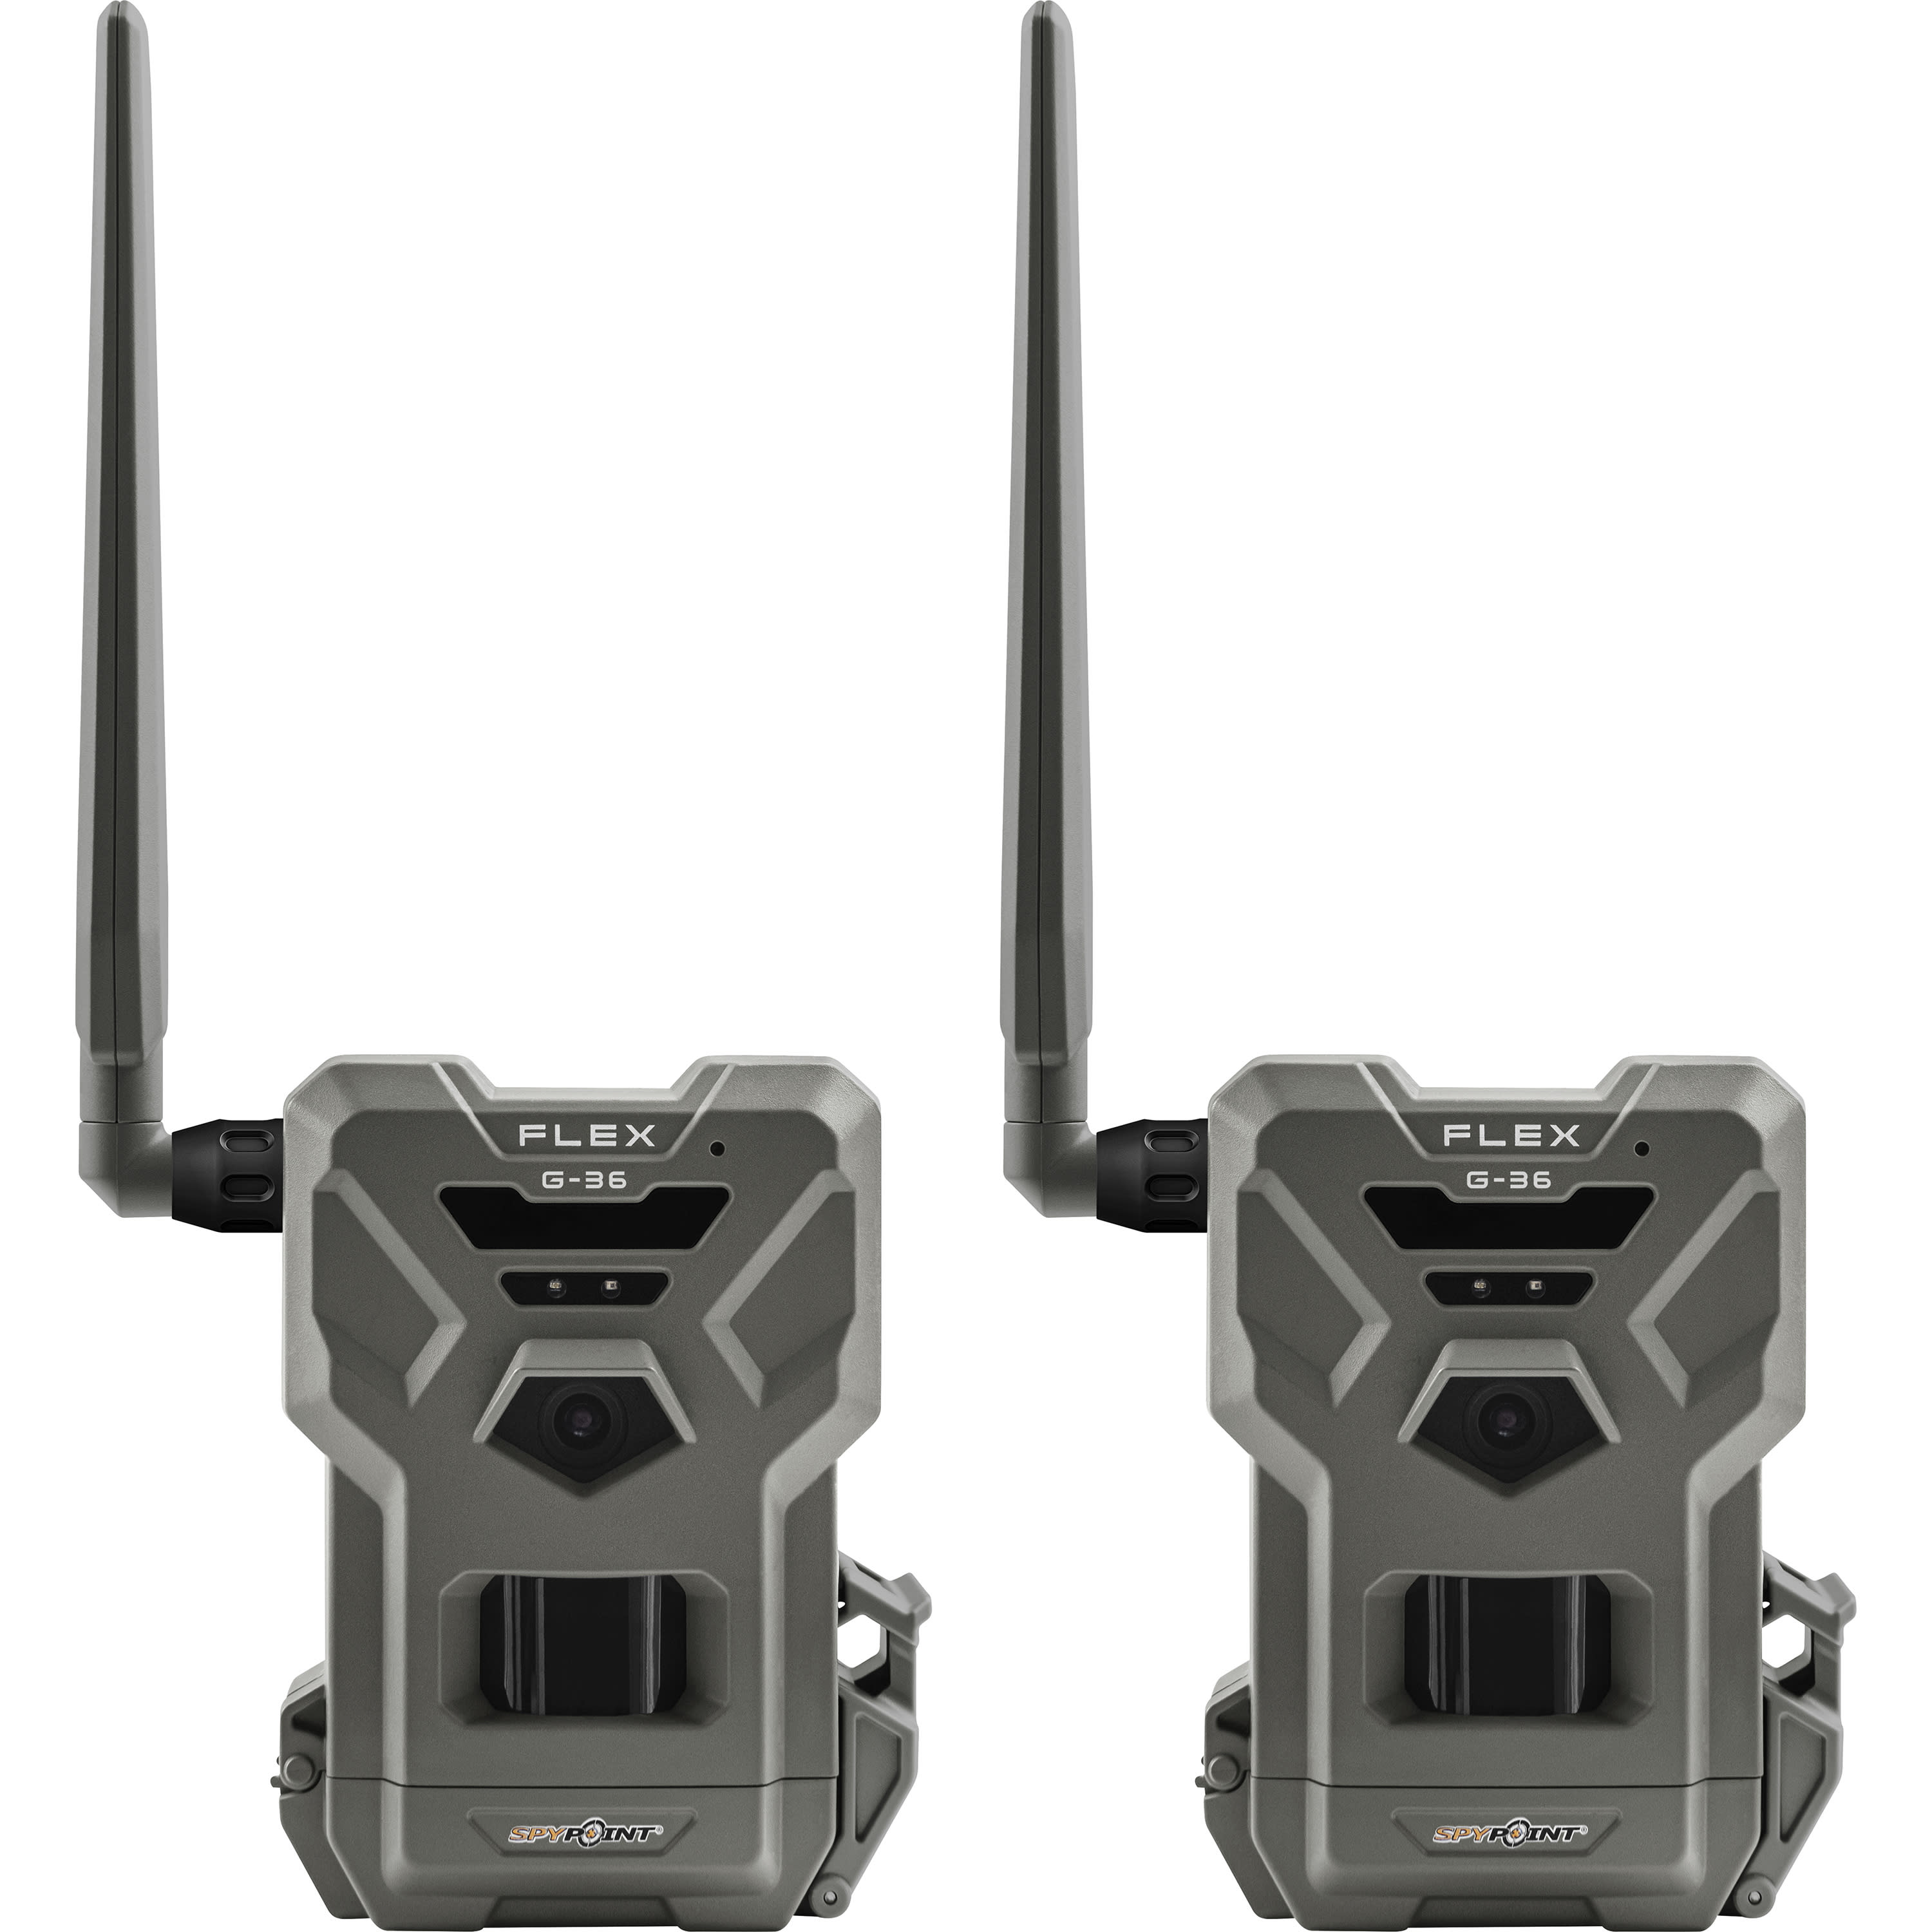 SPYPOINT FLEX G-36 Cellular Trail Camera – Twin Pack